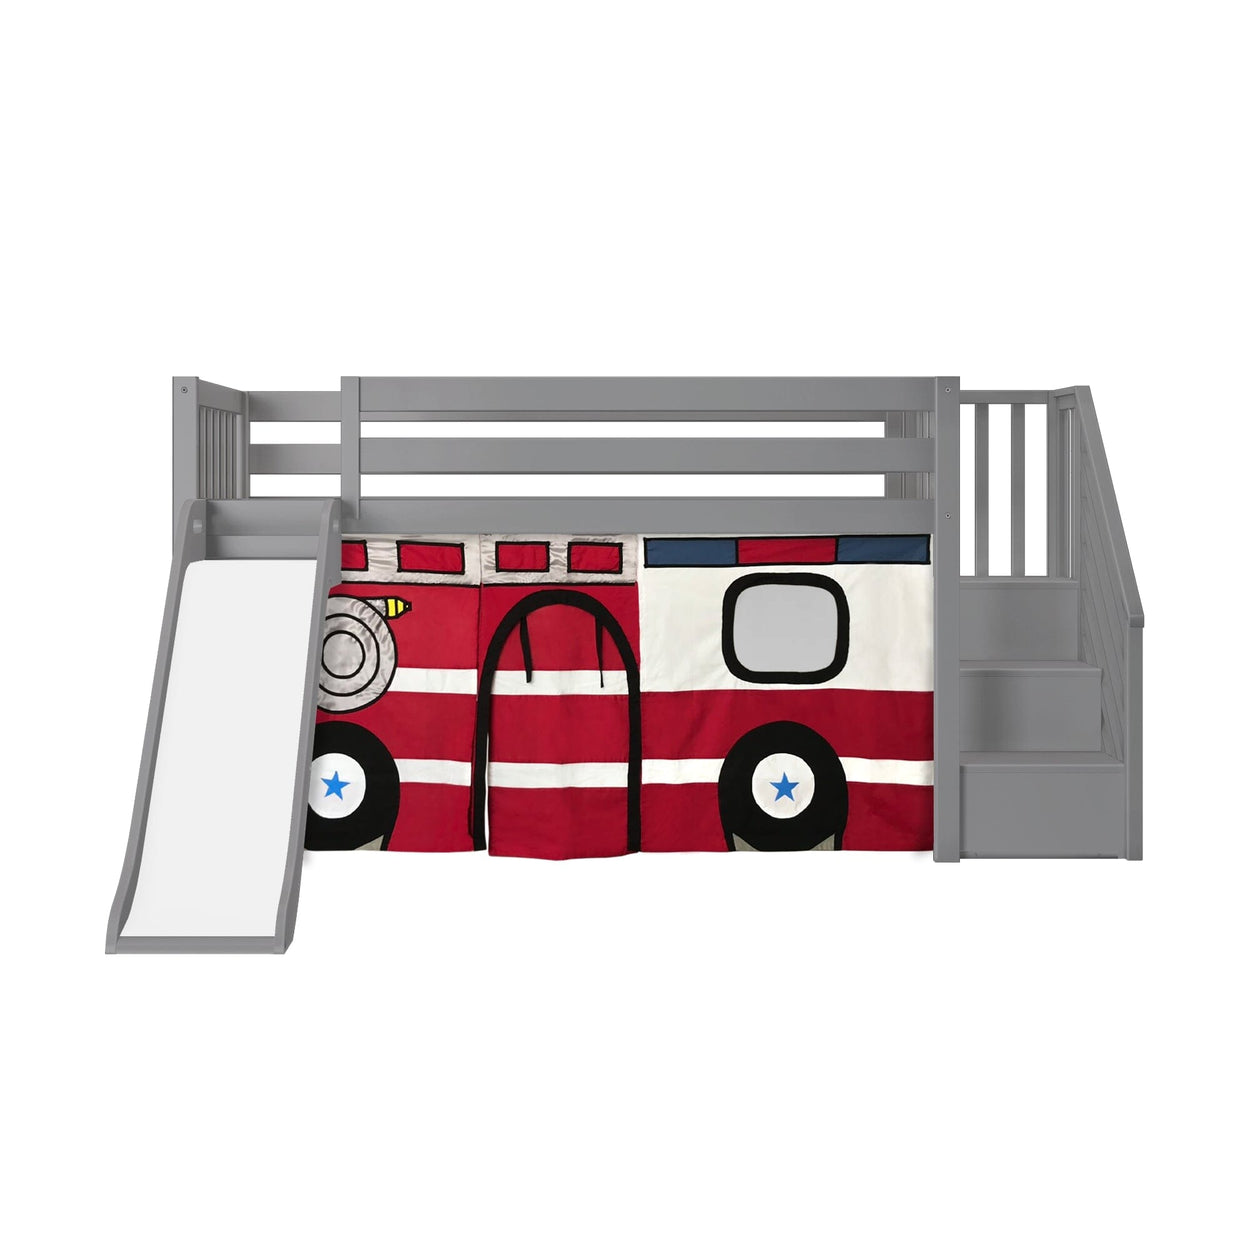 180425121043 : Loft Beds Low Loft with Stairs, Easy Slide and Firetruck Curtain, Grey